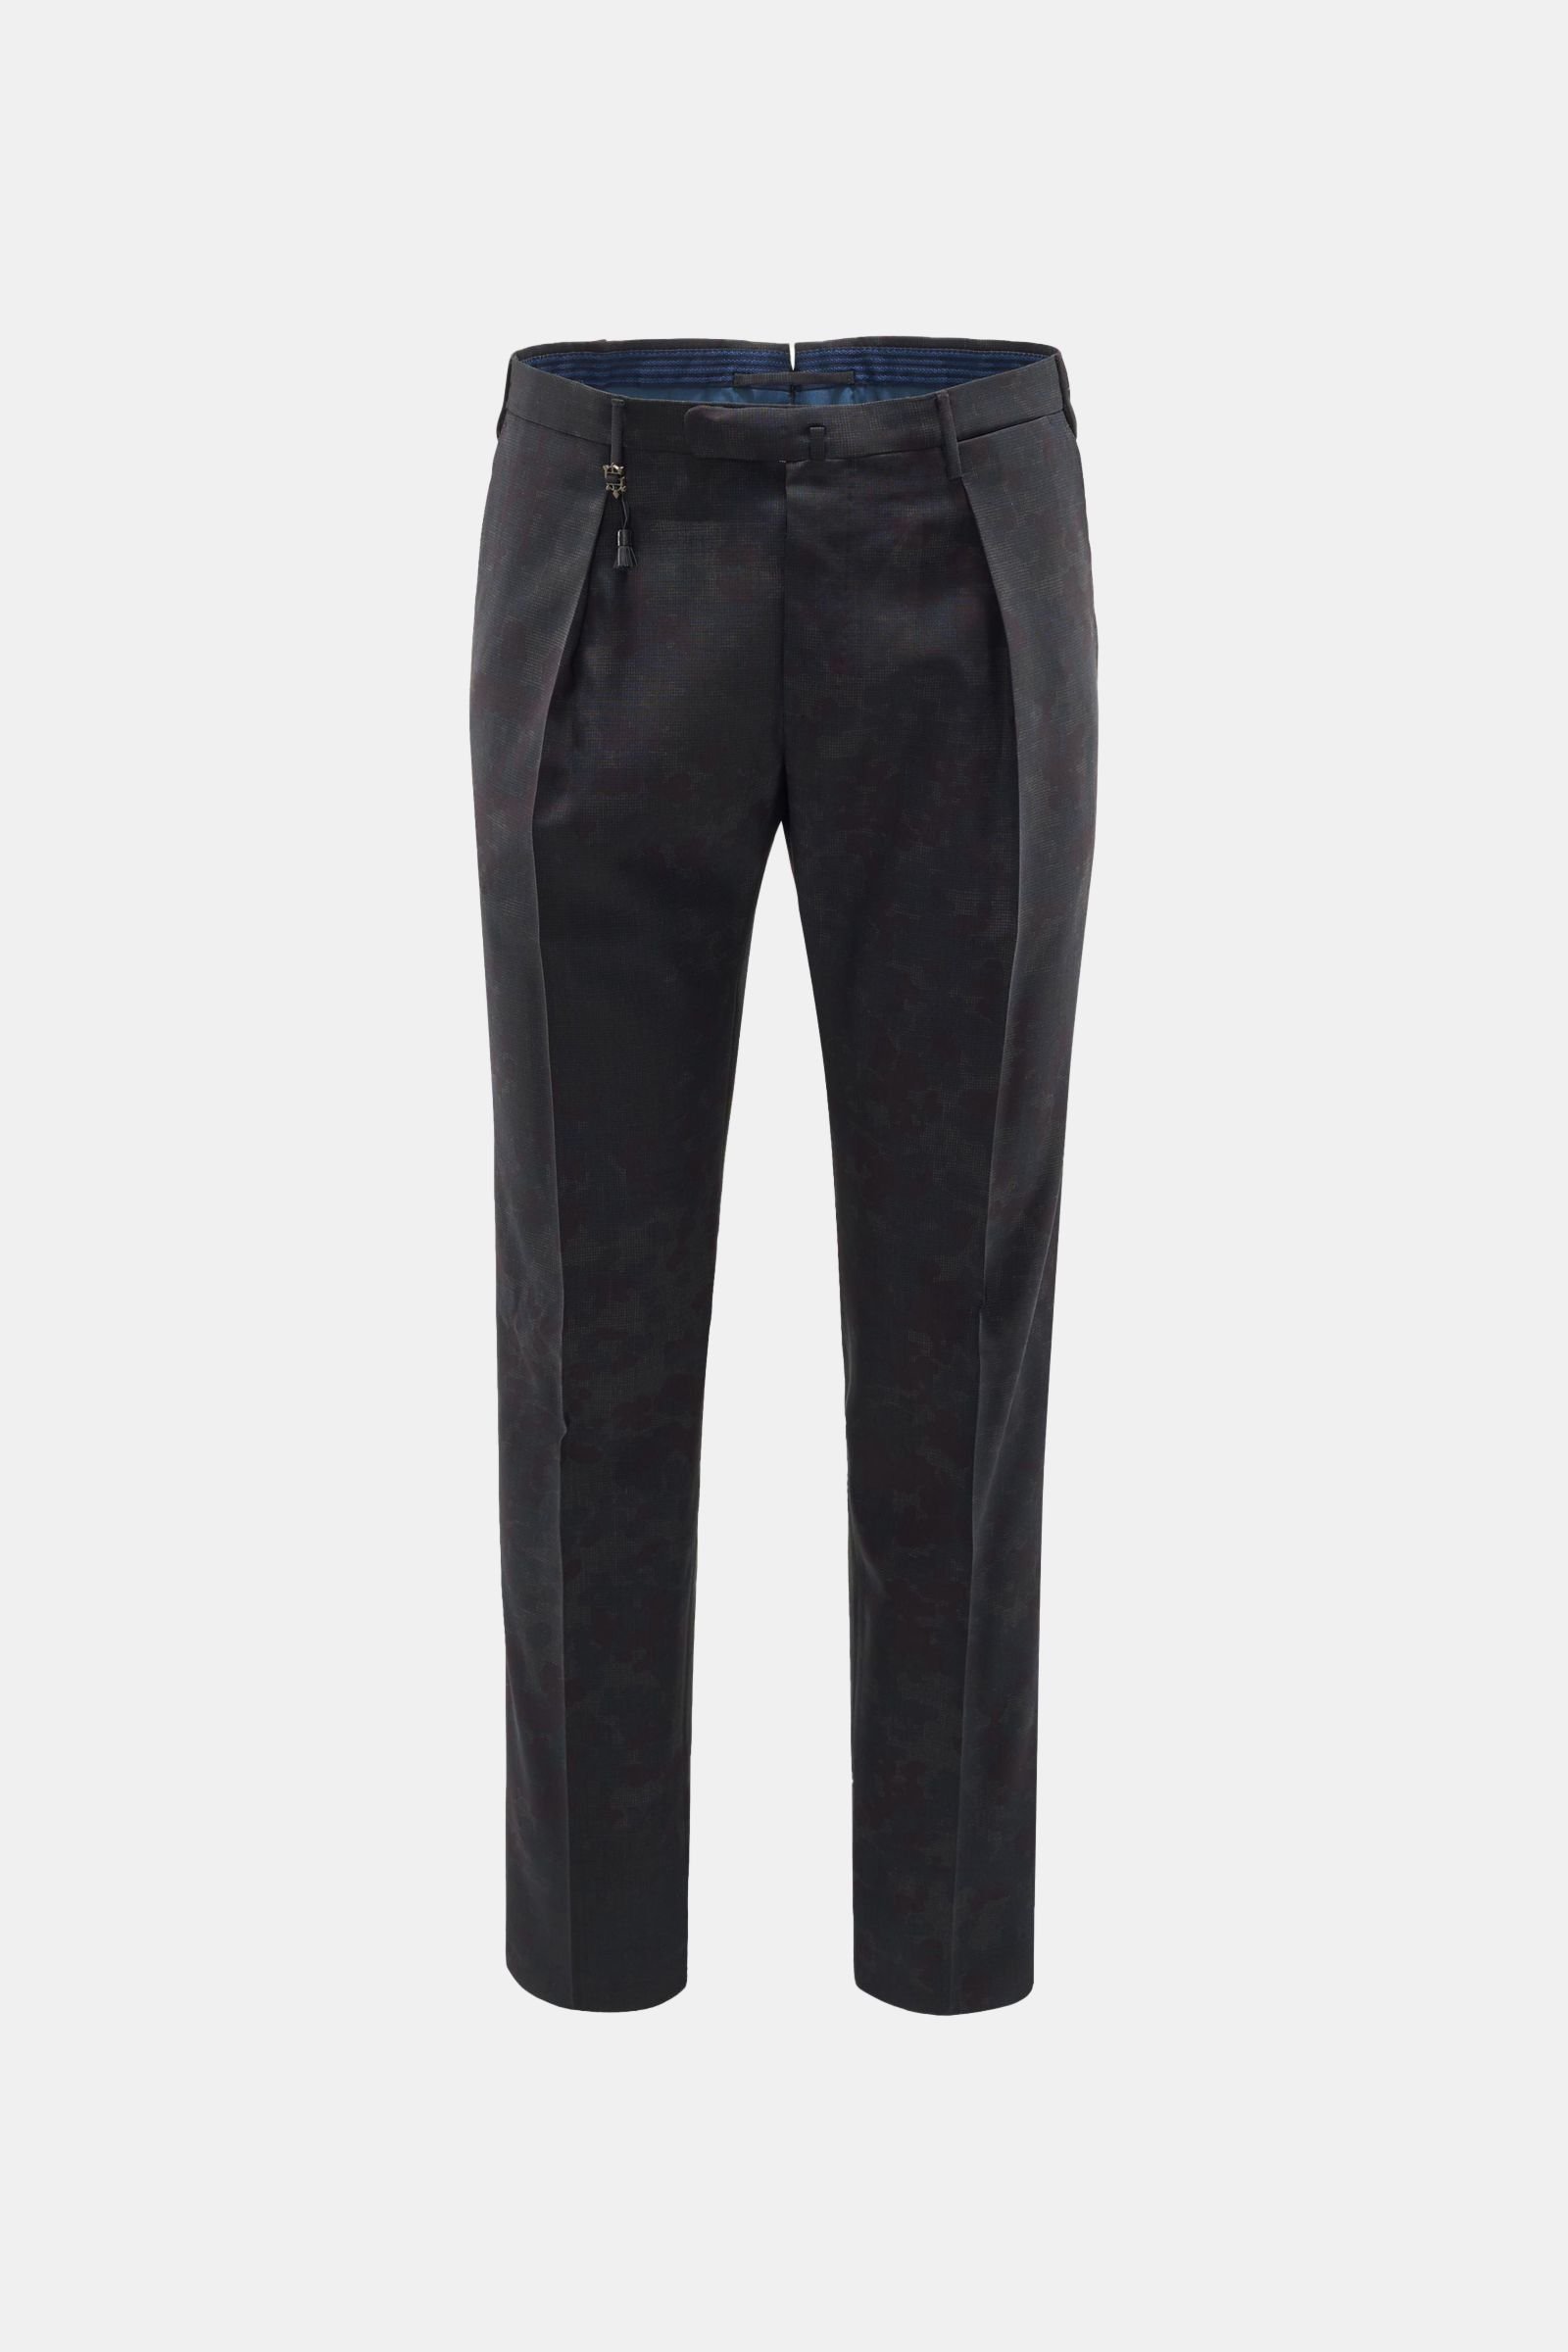 Wool trousers 'Tapered Fit' dark grey patterned